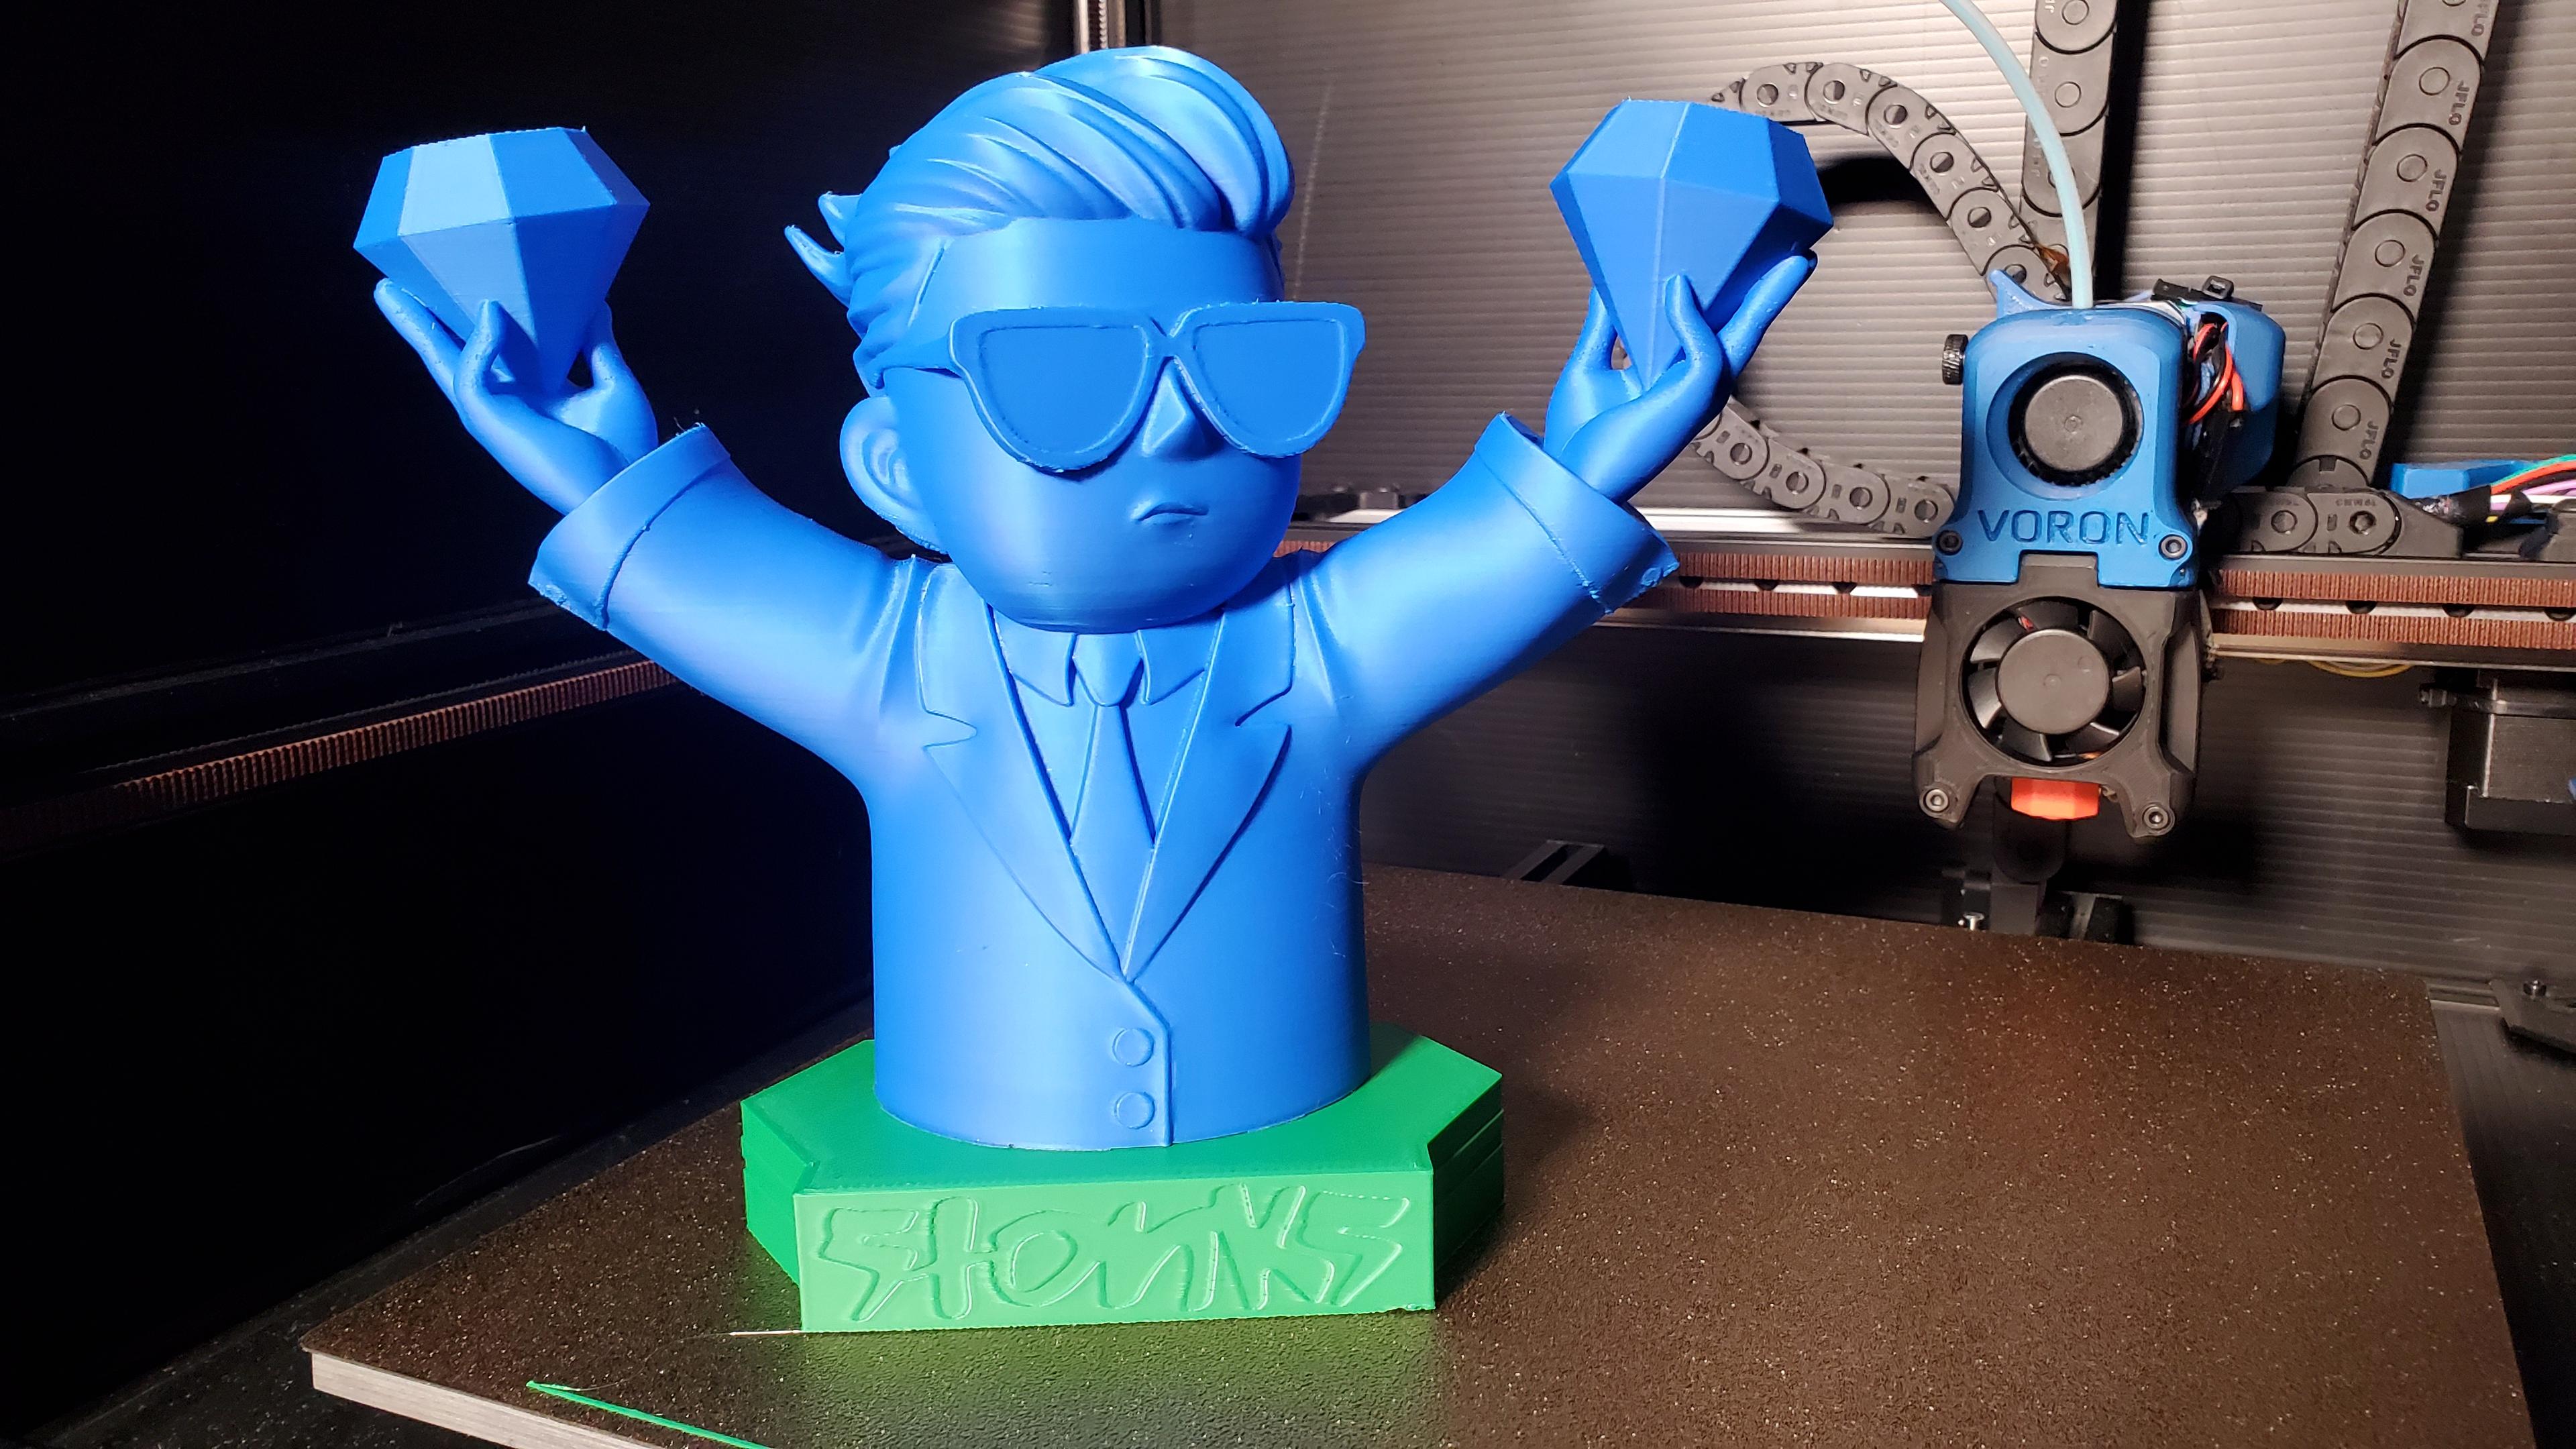 Wallstreetbets Diamond Hands - Voron v2.4 corexy
Pla @.2mm lh with a .6mm nozzle - 3d model